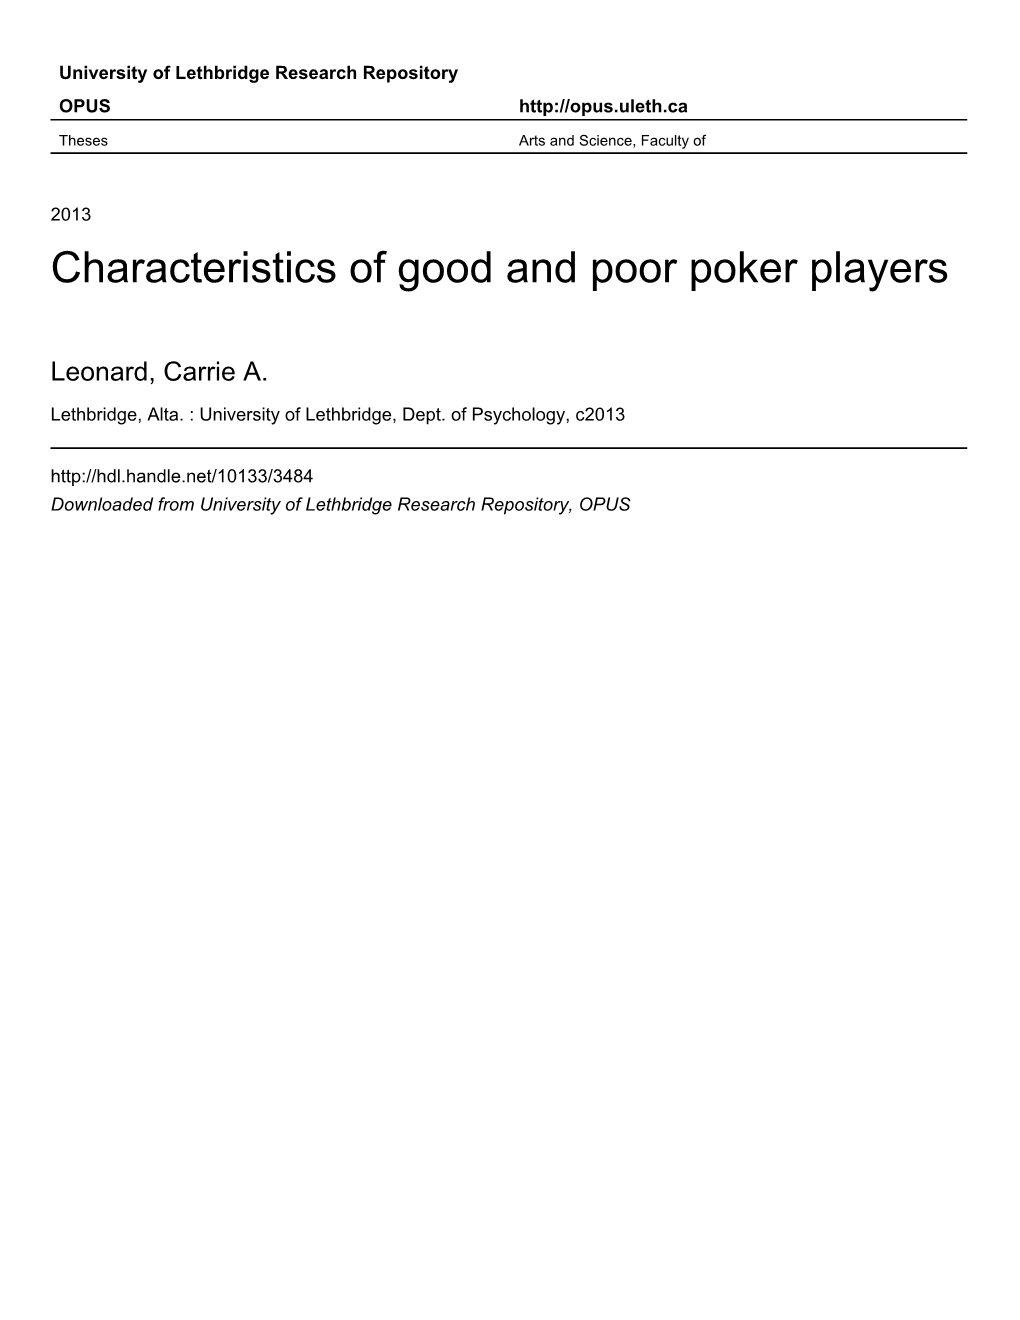 Characteristics of Good and Poor Poker Players